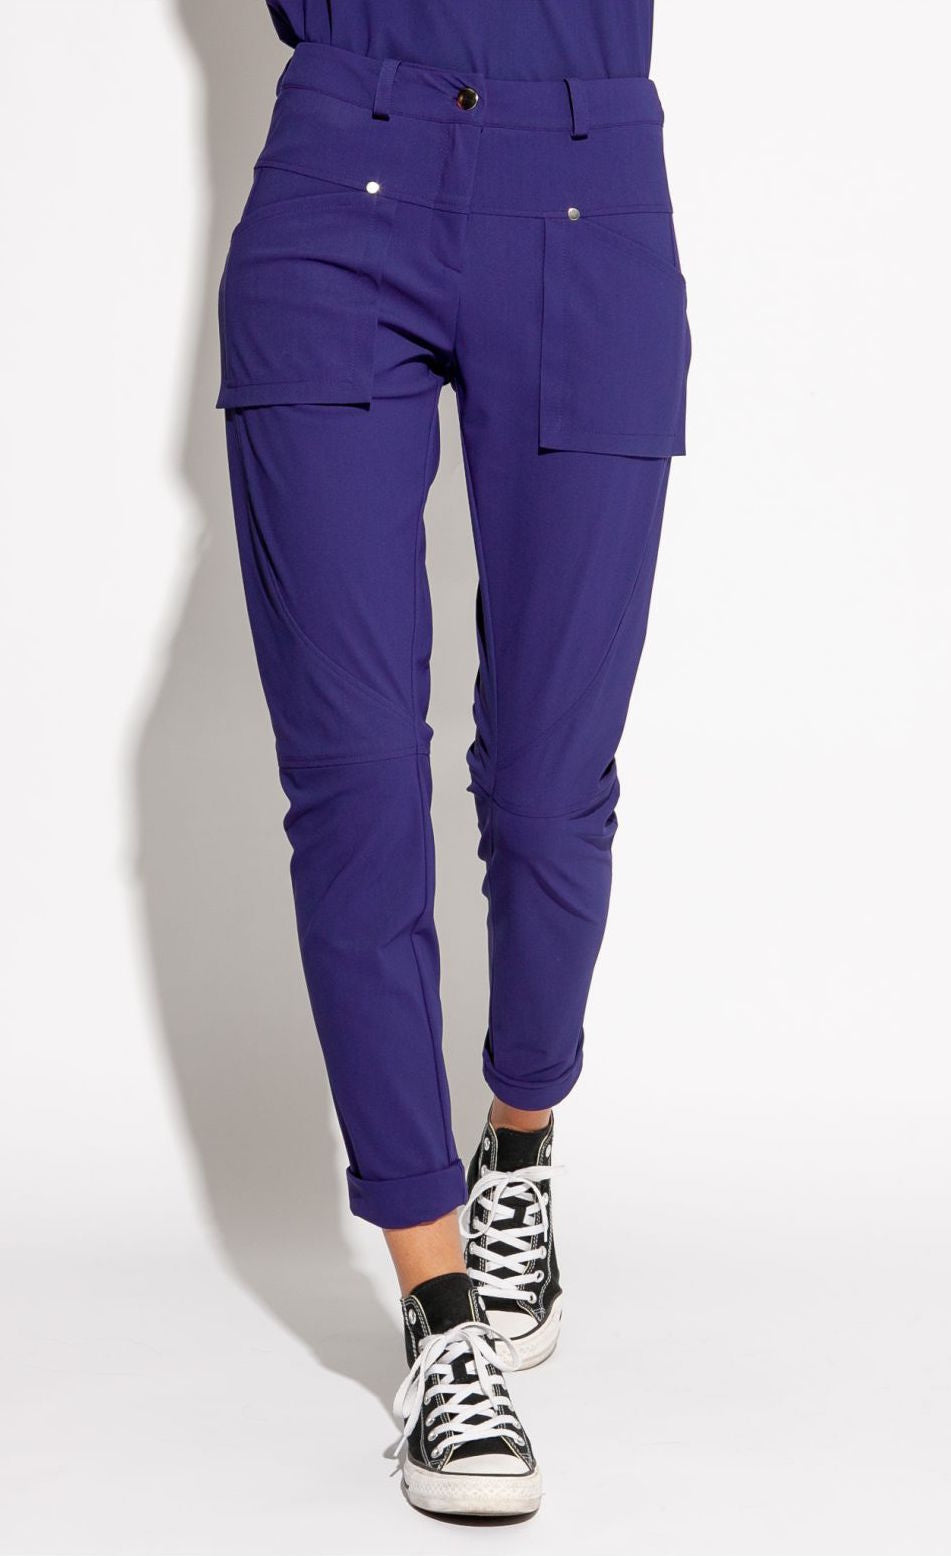 Front bottom half view of a woman wearing the indies nico pant in the color indigo. This pant has two front patch pockets. The pant also has seams on the knees and a cuffed hem that ends above the ankles.